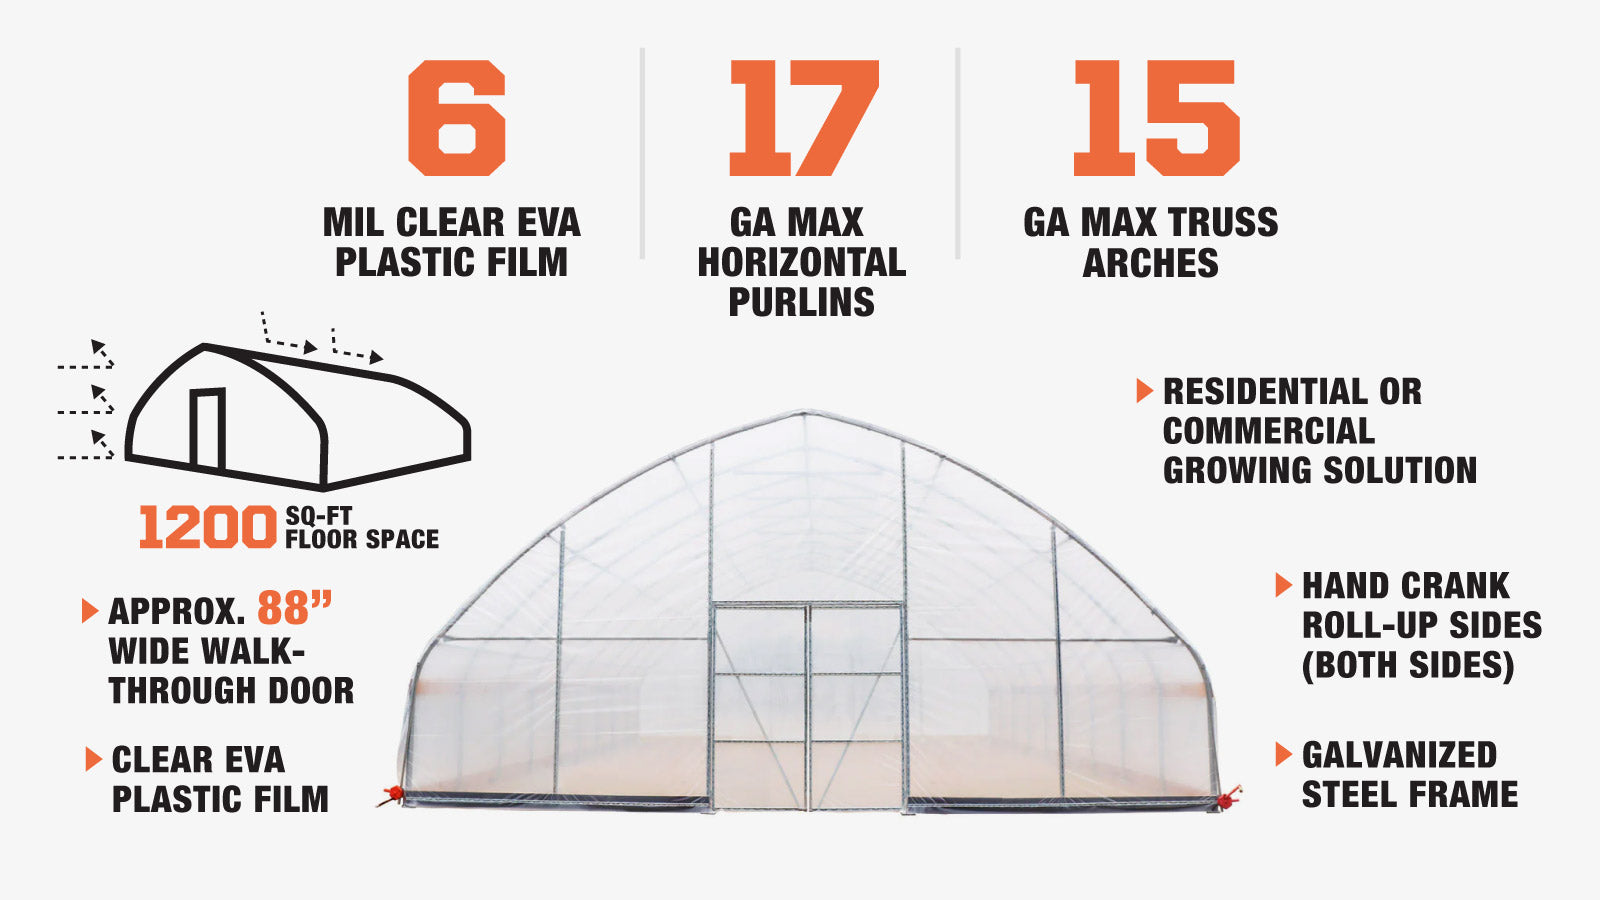 TMG Industrial 30’ x 40’ Tunnel Greenhouse Grow Tent w/6 Mil Clear EVA Plastic Film, Cold Frame, Hand Crank Roll-Up Sides, Peak Ceiling Roof, TMG-GH3040-description-image